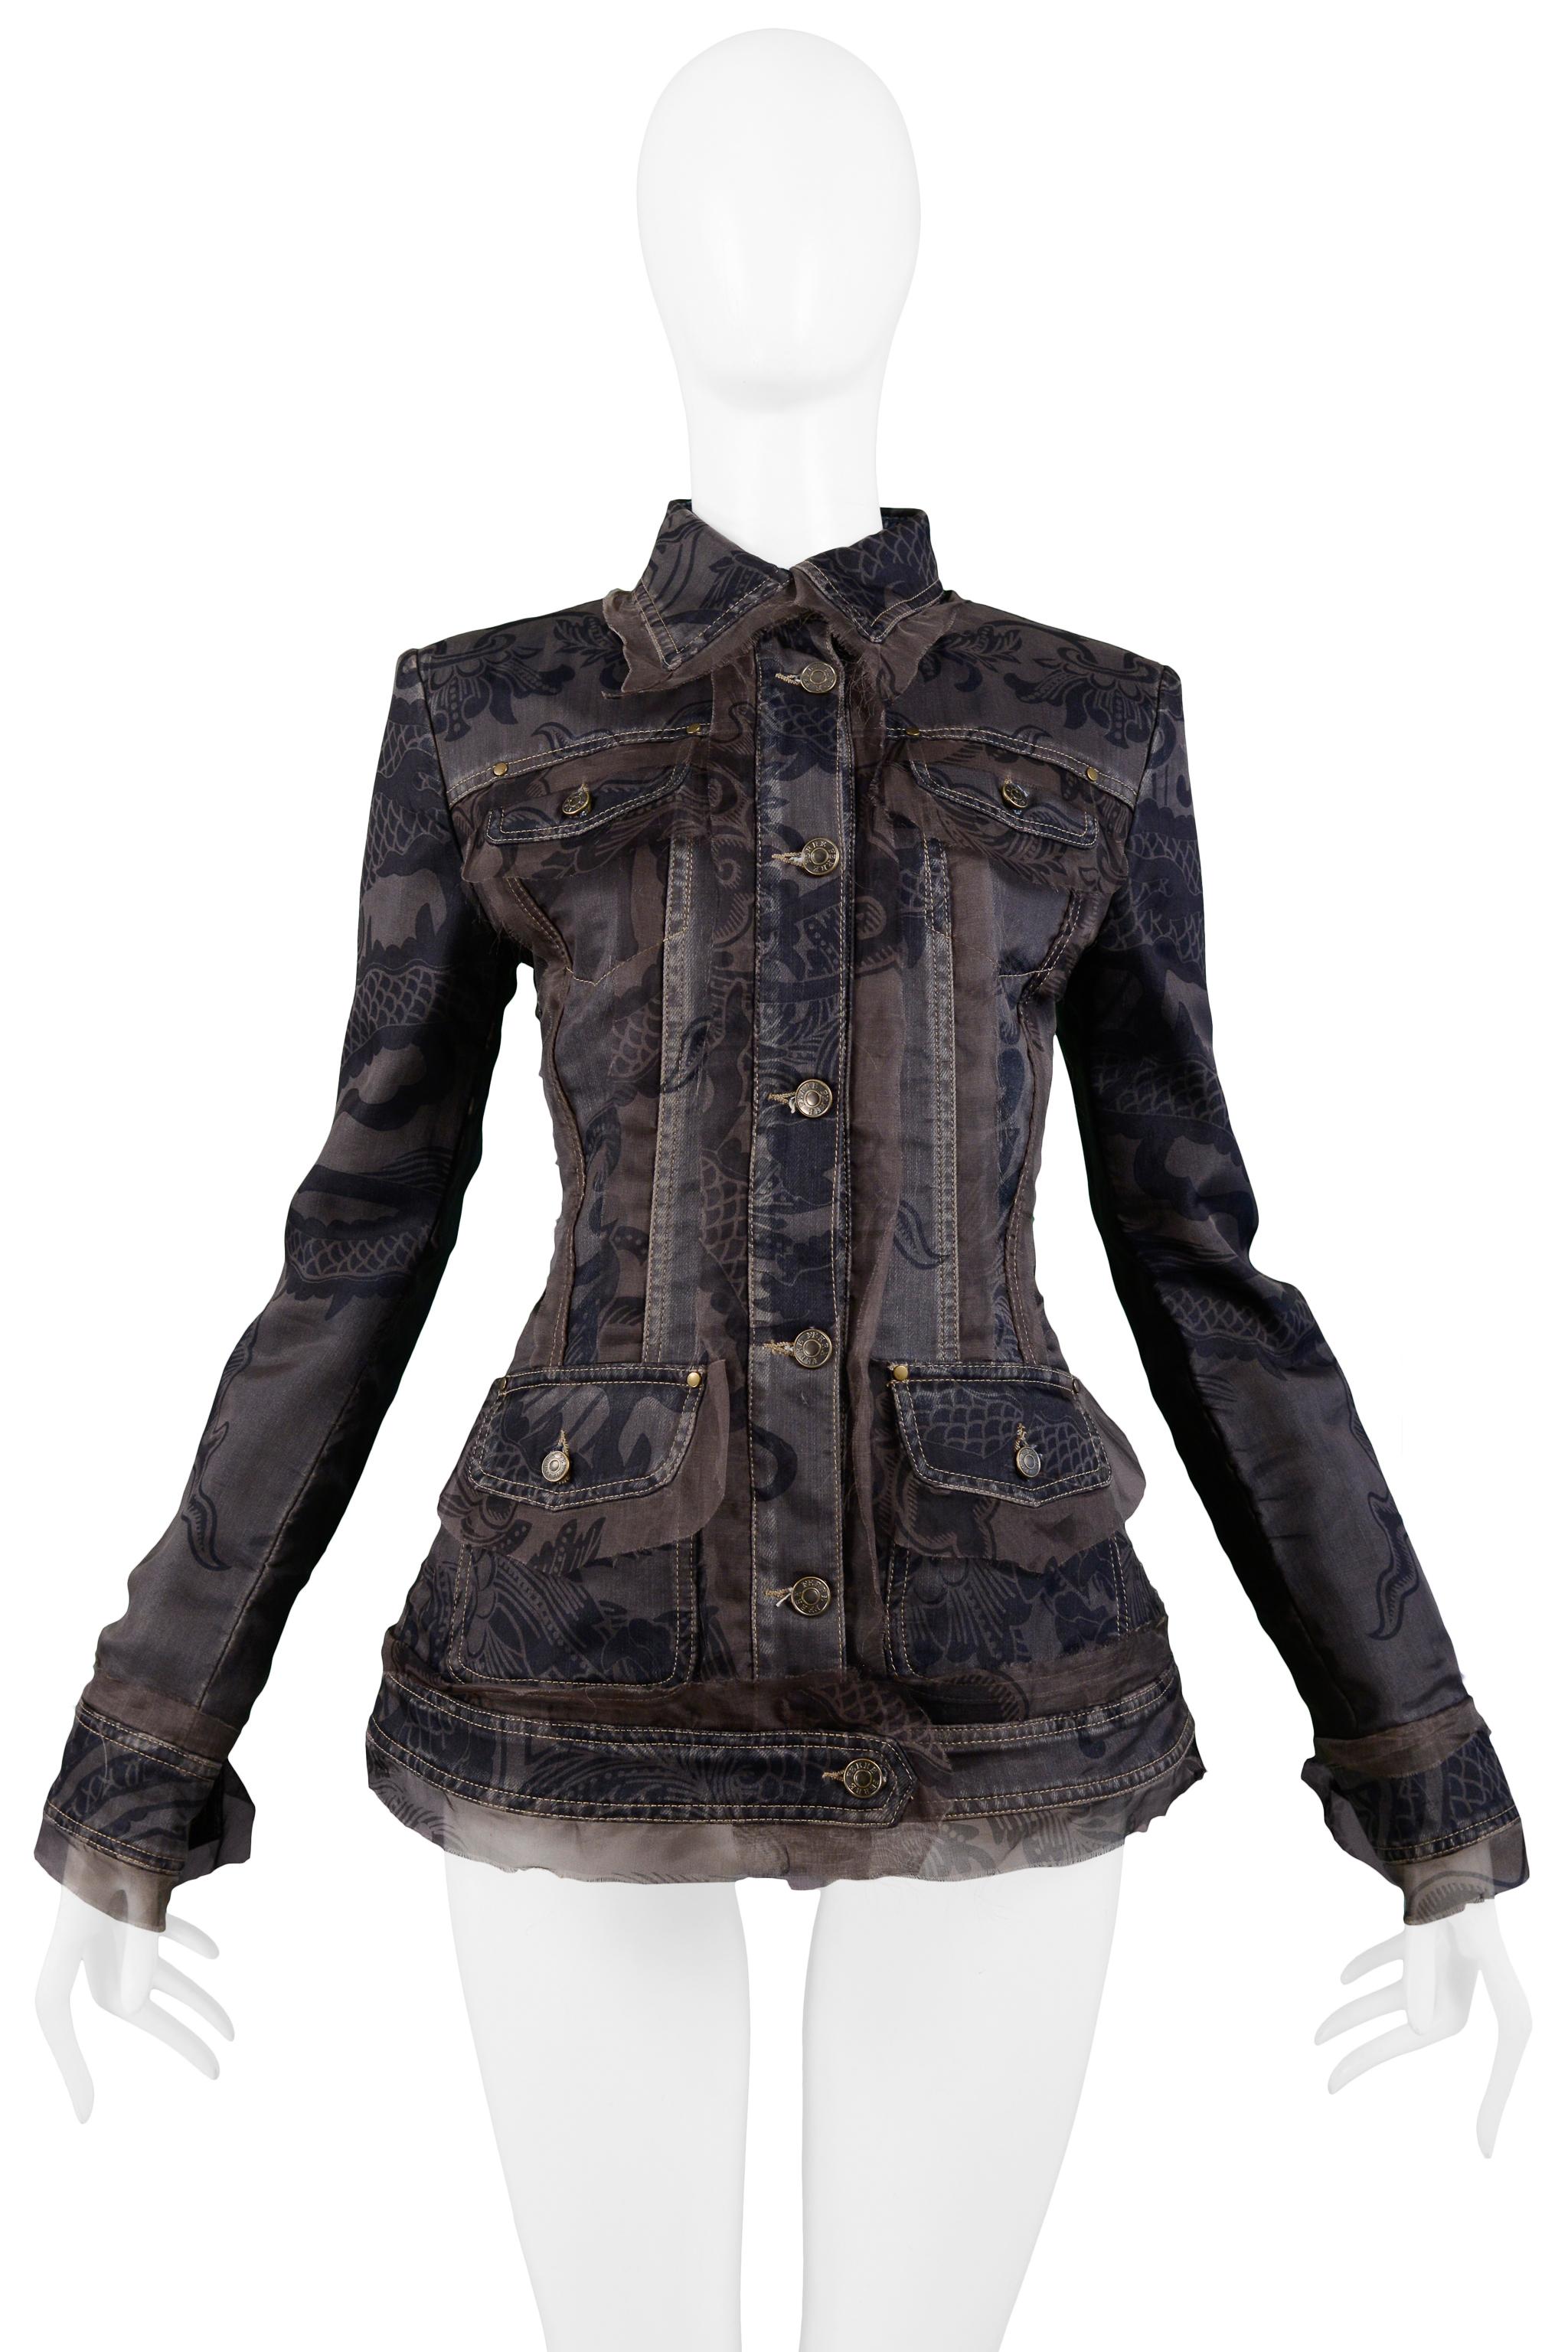 Resurrection Vintage is excited to offer a vintage Gianfranco Ferre denim jacket featuring printed organza overlay, flap collar, silver rivets and snaps, raw edges, and four front pockets.  

Gianfranco Ferre Label
65% Silk, 35% Cotton,
100% Silk